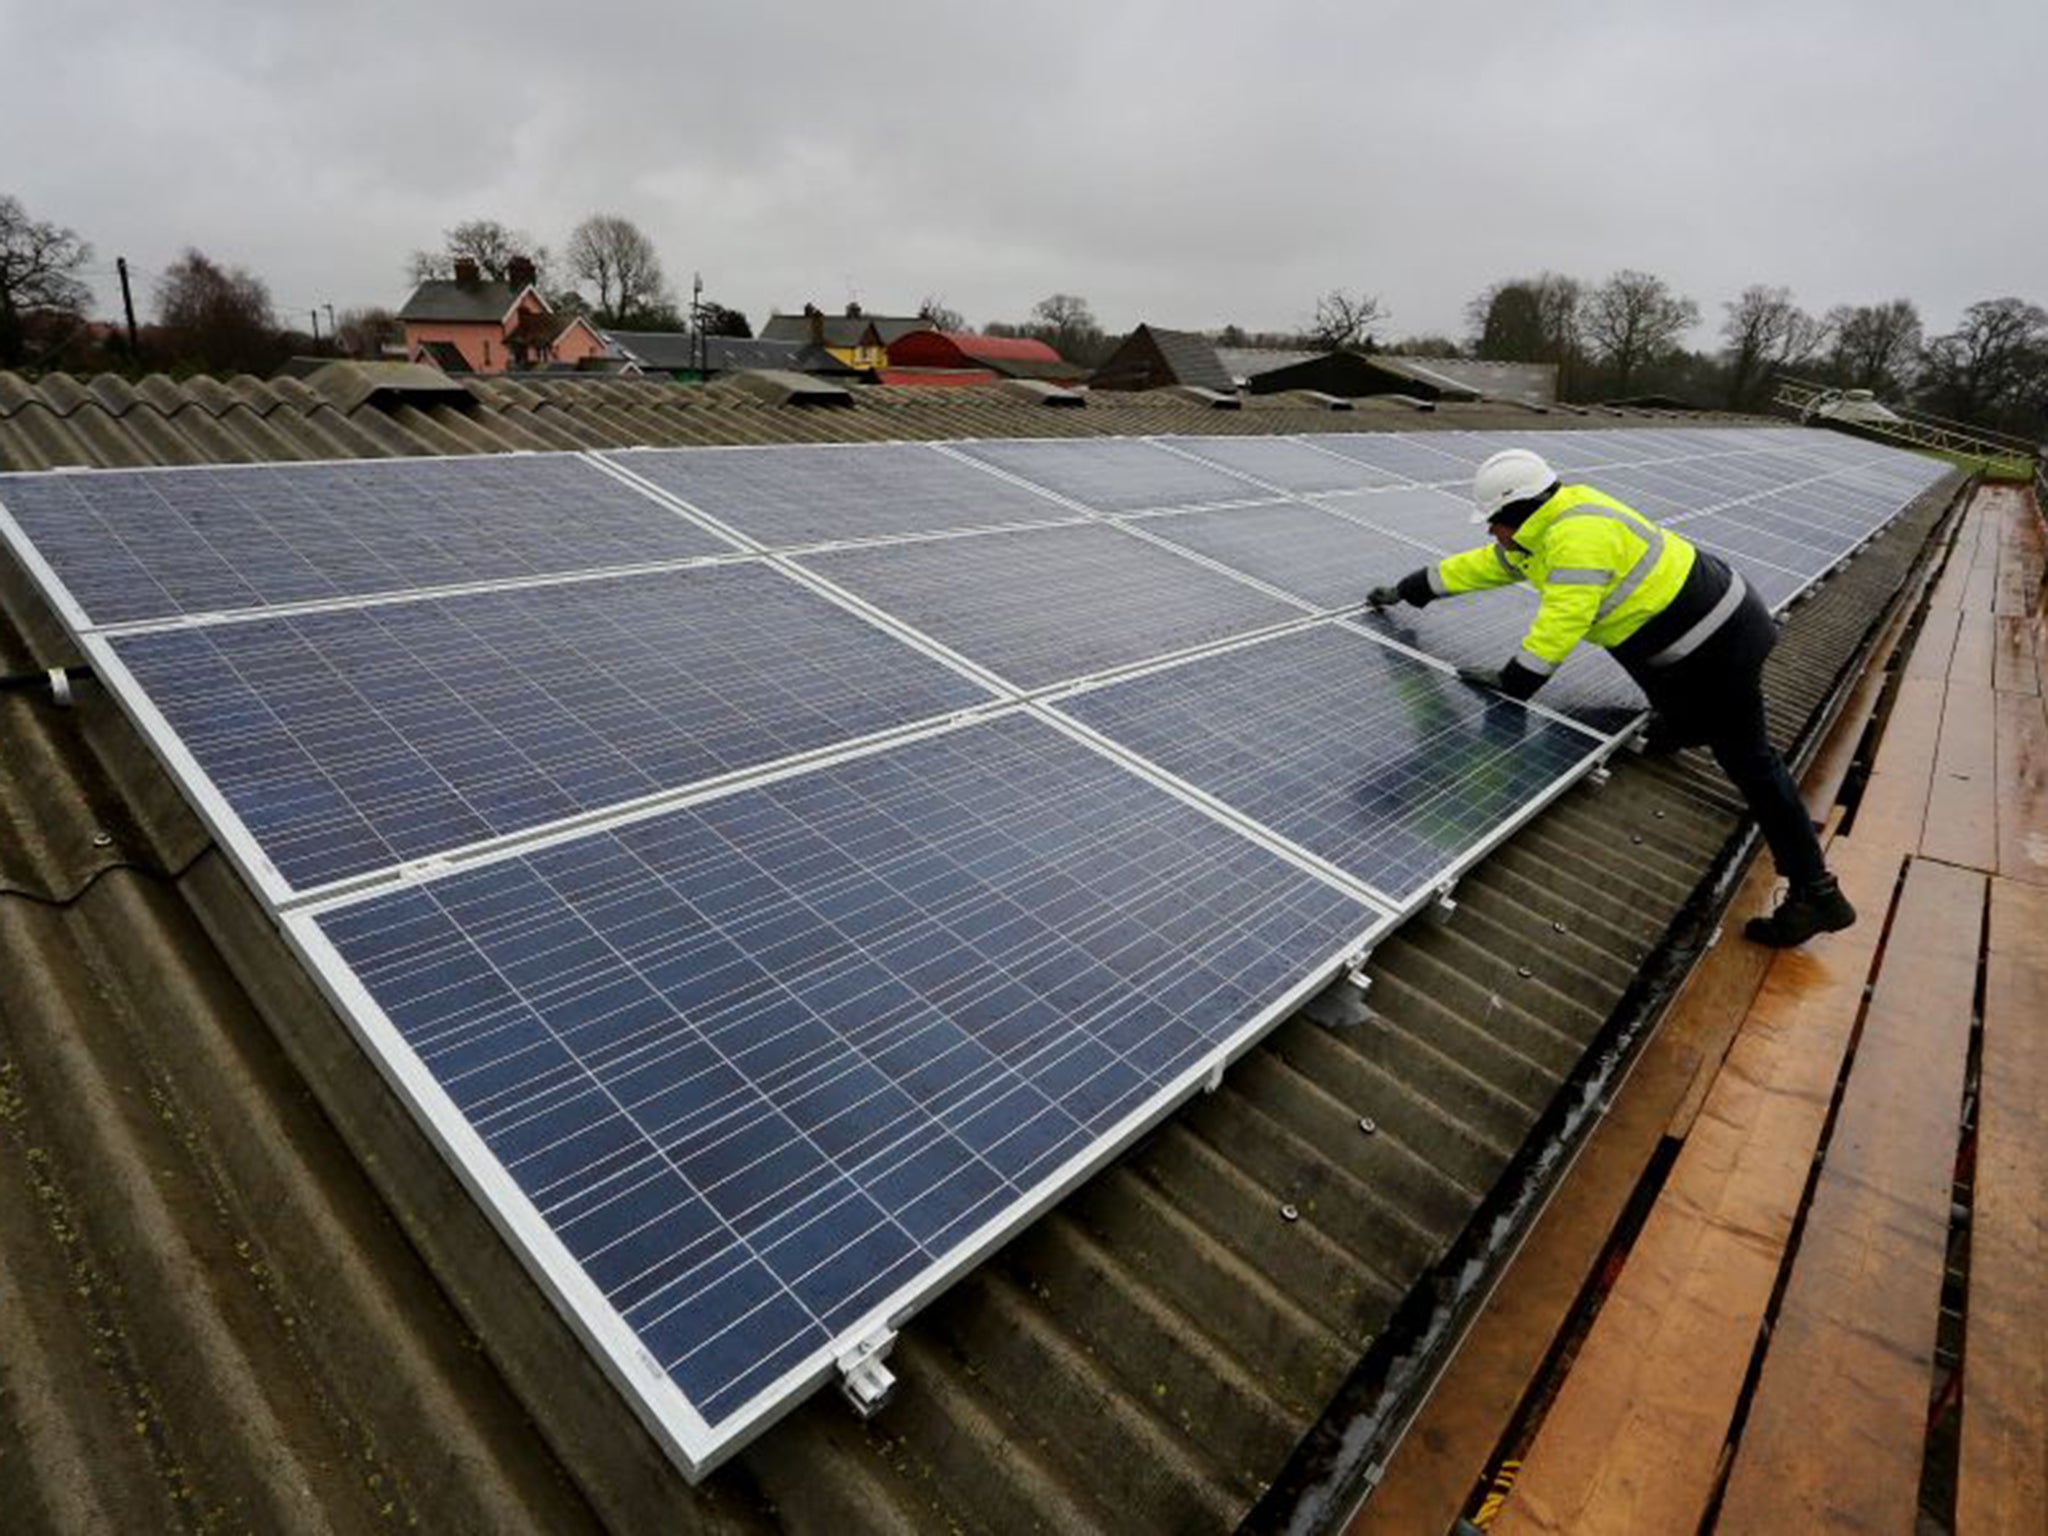 Leo Smith, project manager with Southern Solar, at work in West Sussex, before the company went out of business